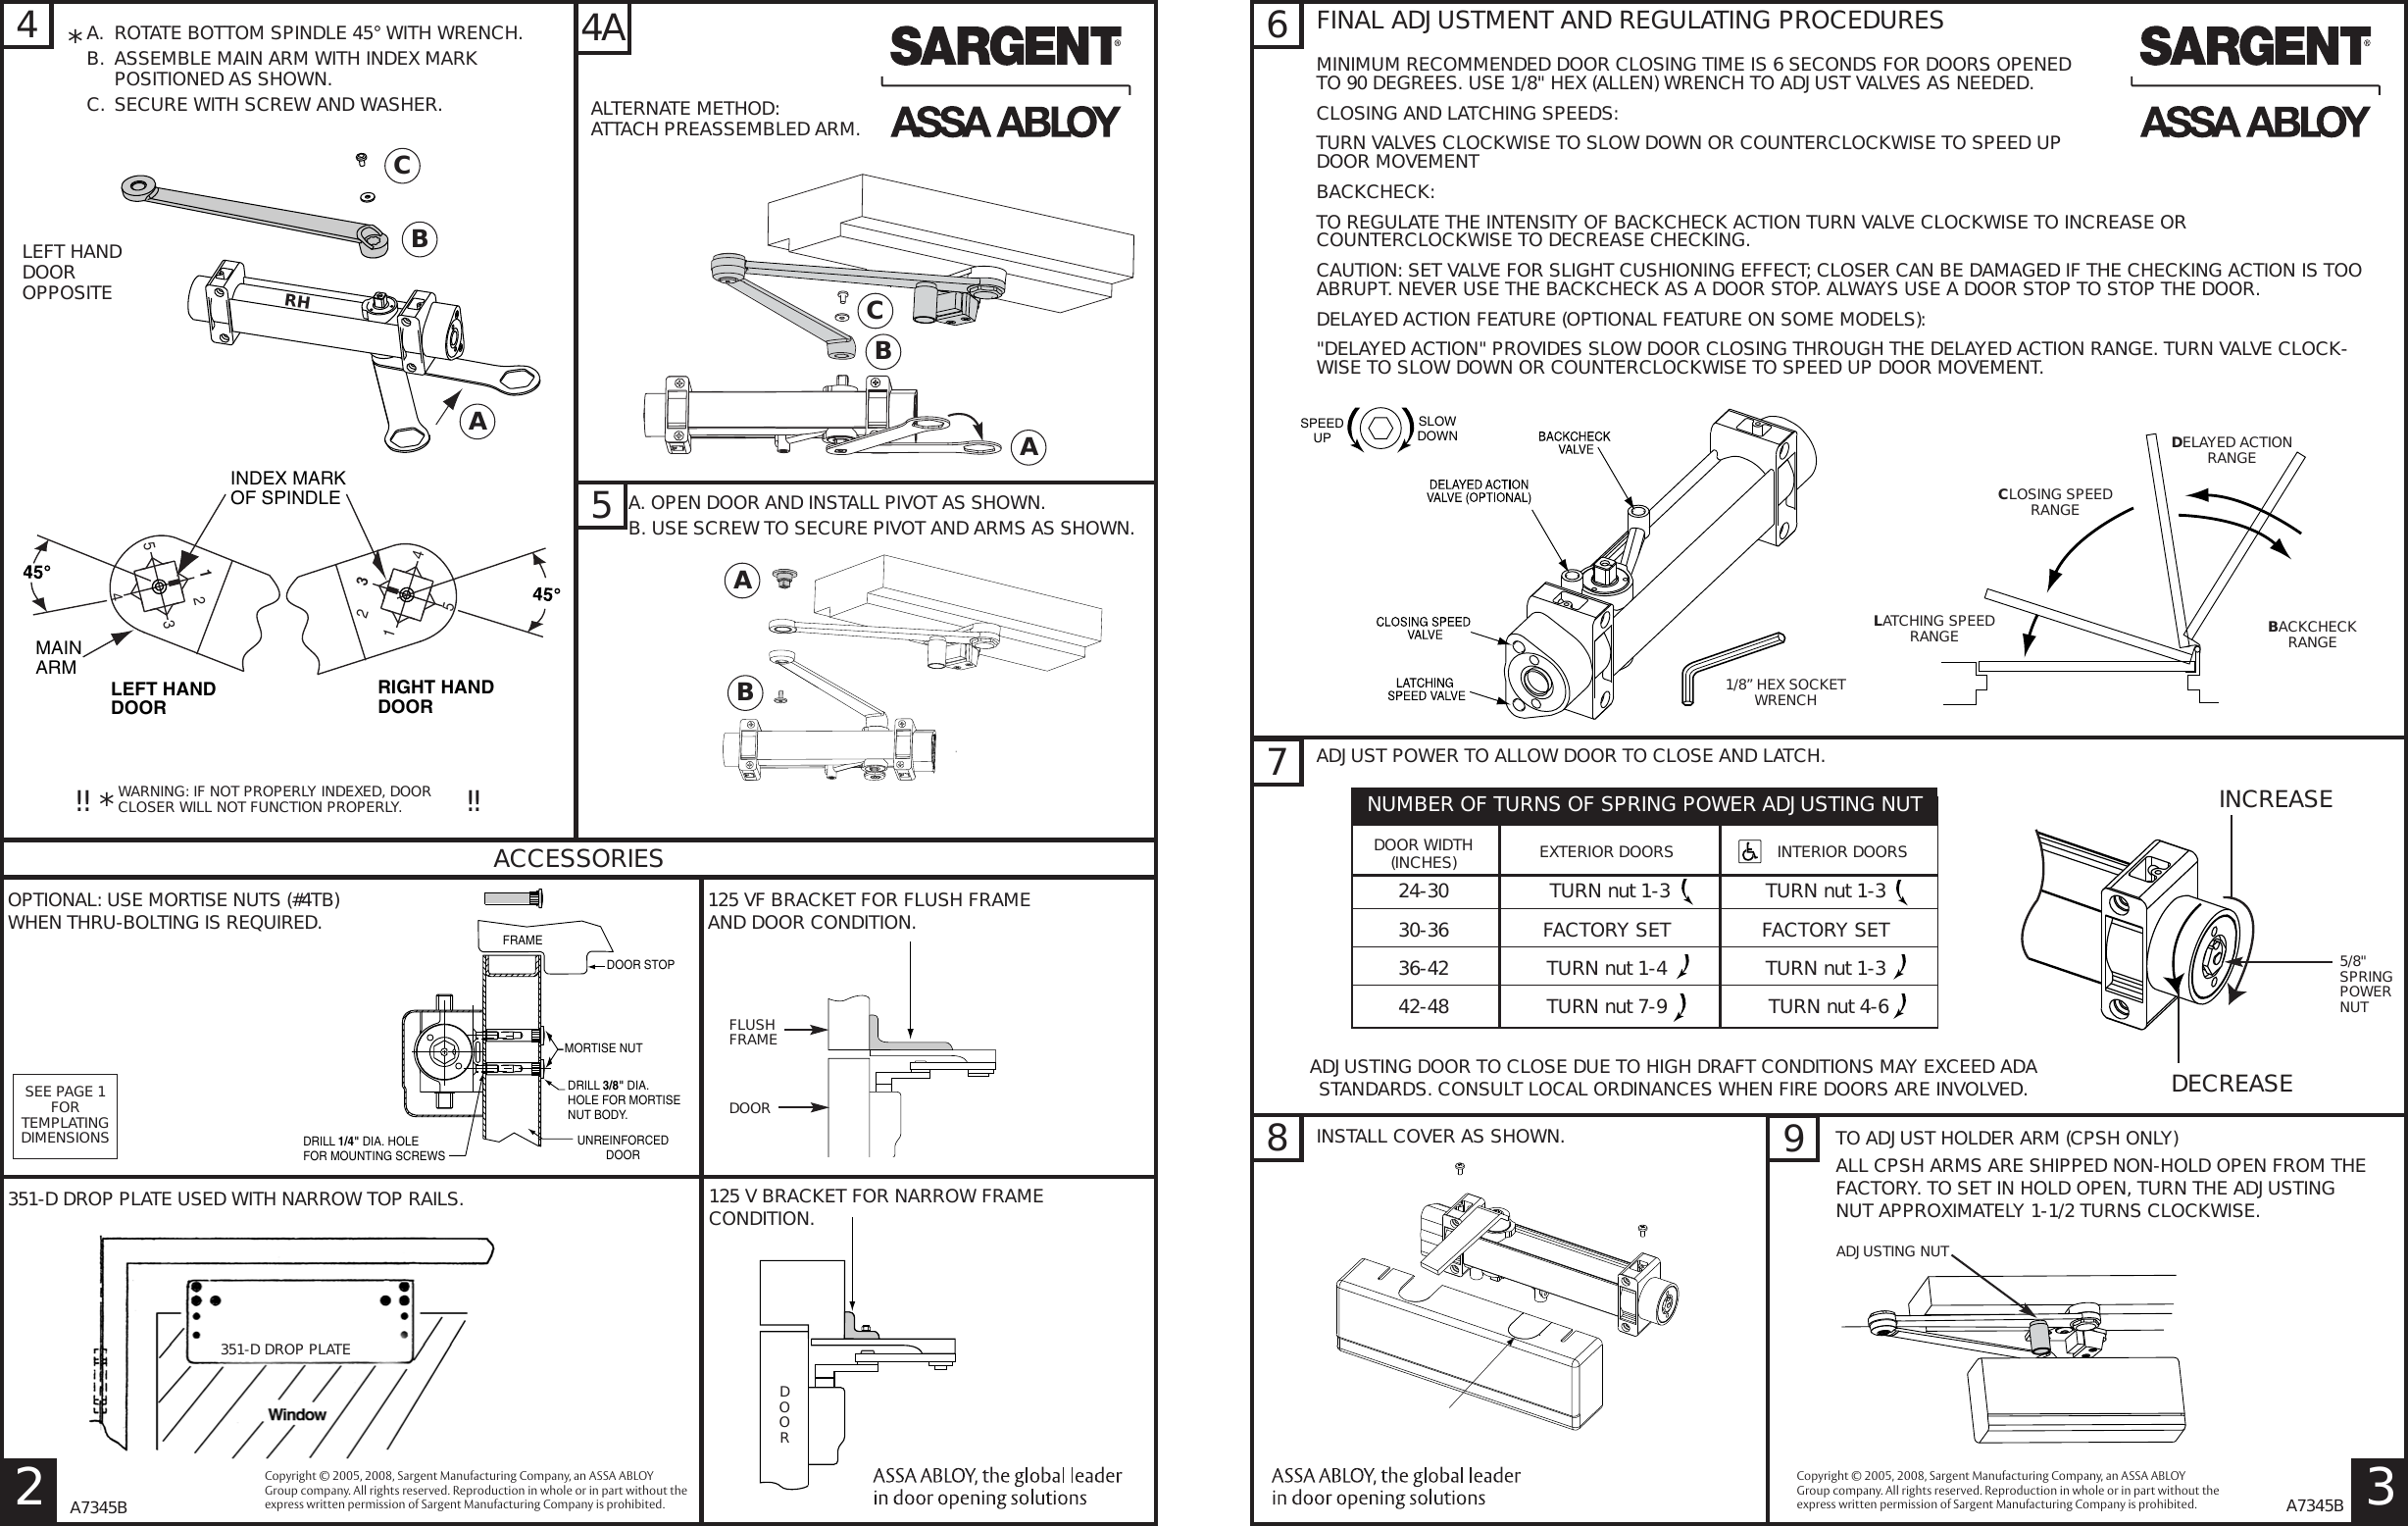 Page 2 of 4 - Sargent 351 Series Door Closers With CPS & CPSH Holder Arms Installation Instructions A7345